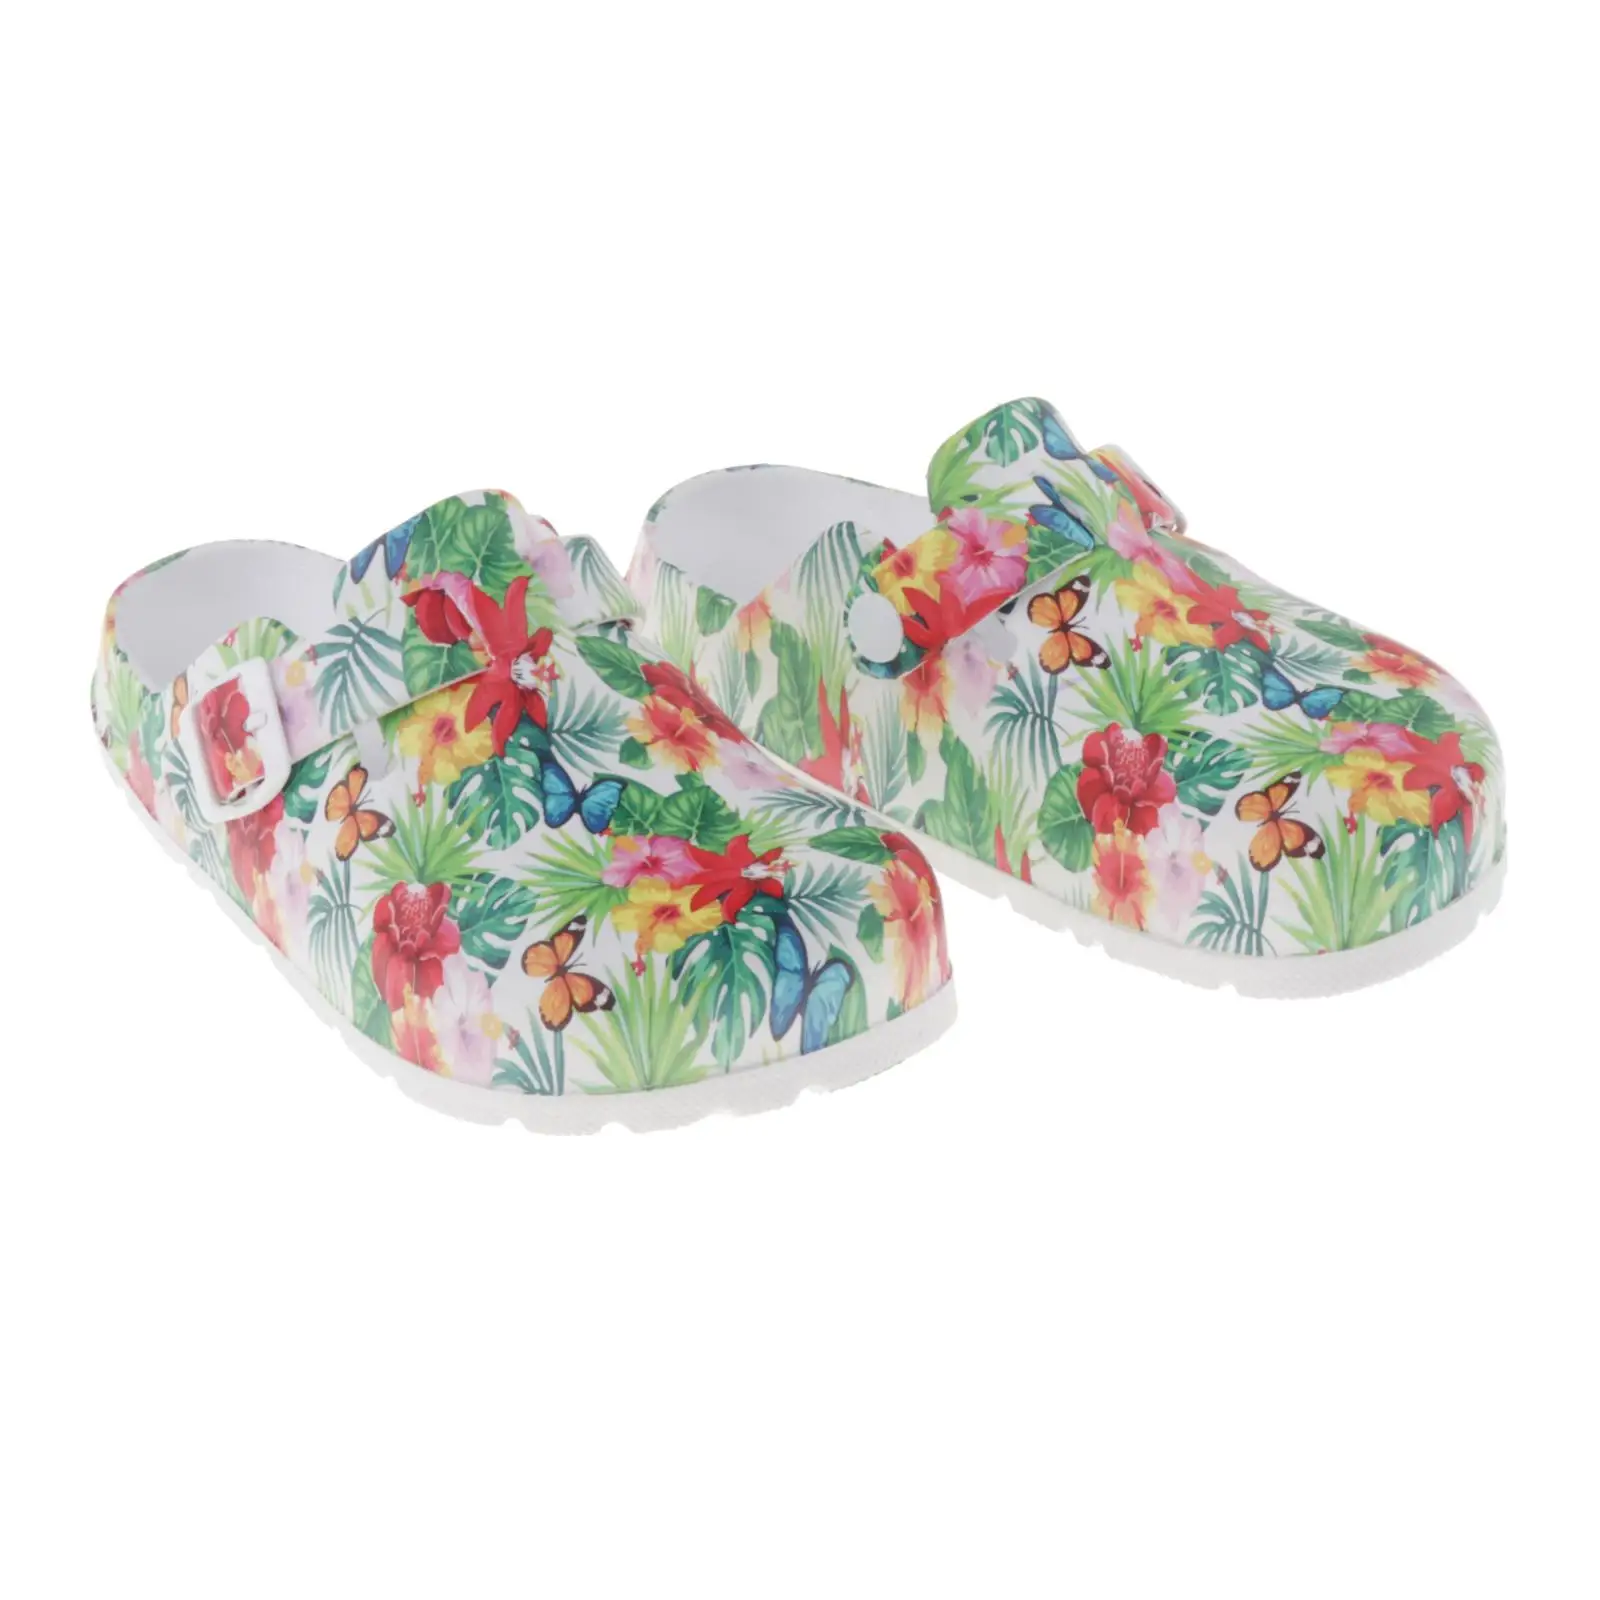 Slip at Work Clogs Anti Slip Care Slippers Kitchen Chef Shoes Summer Im